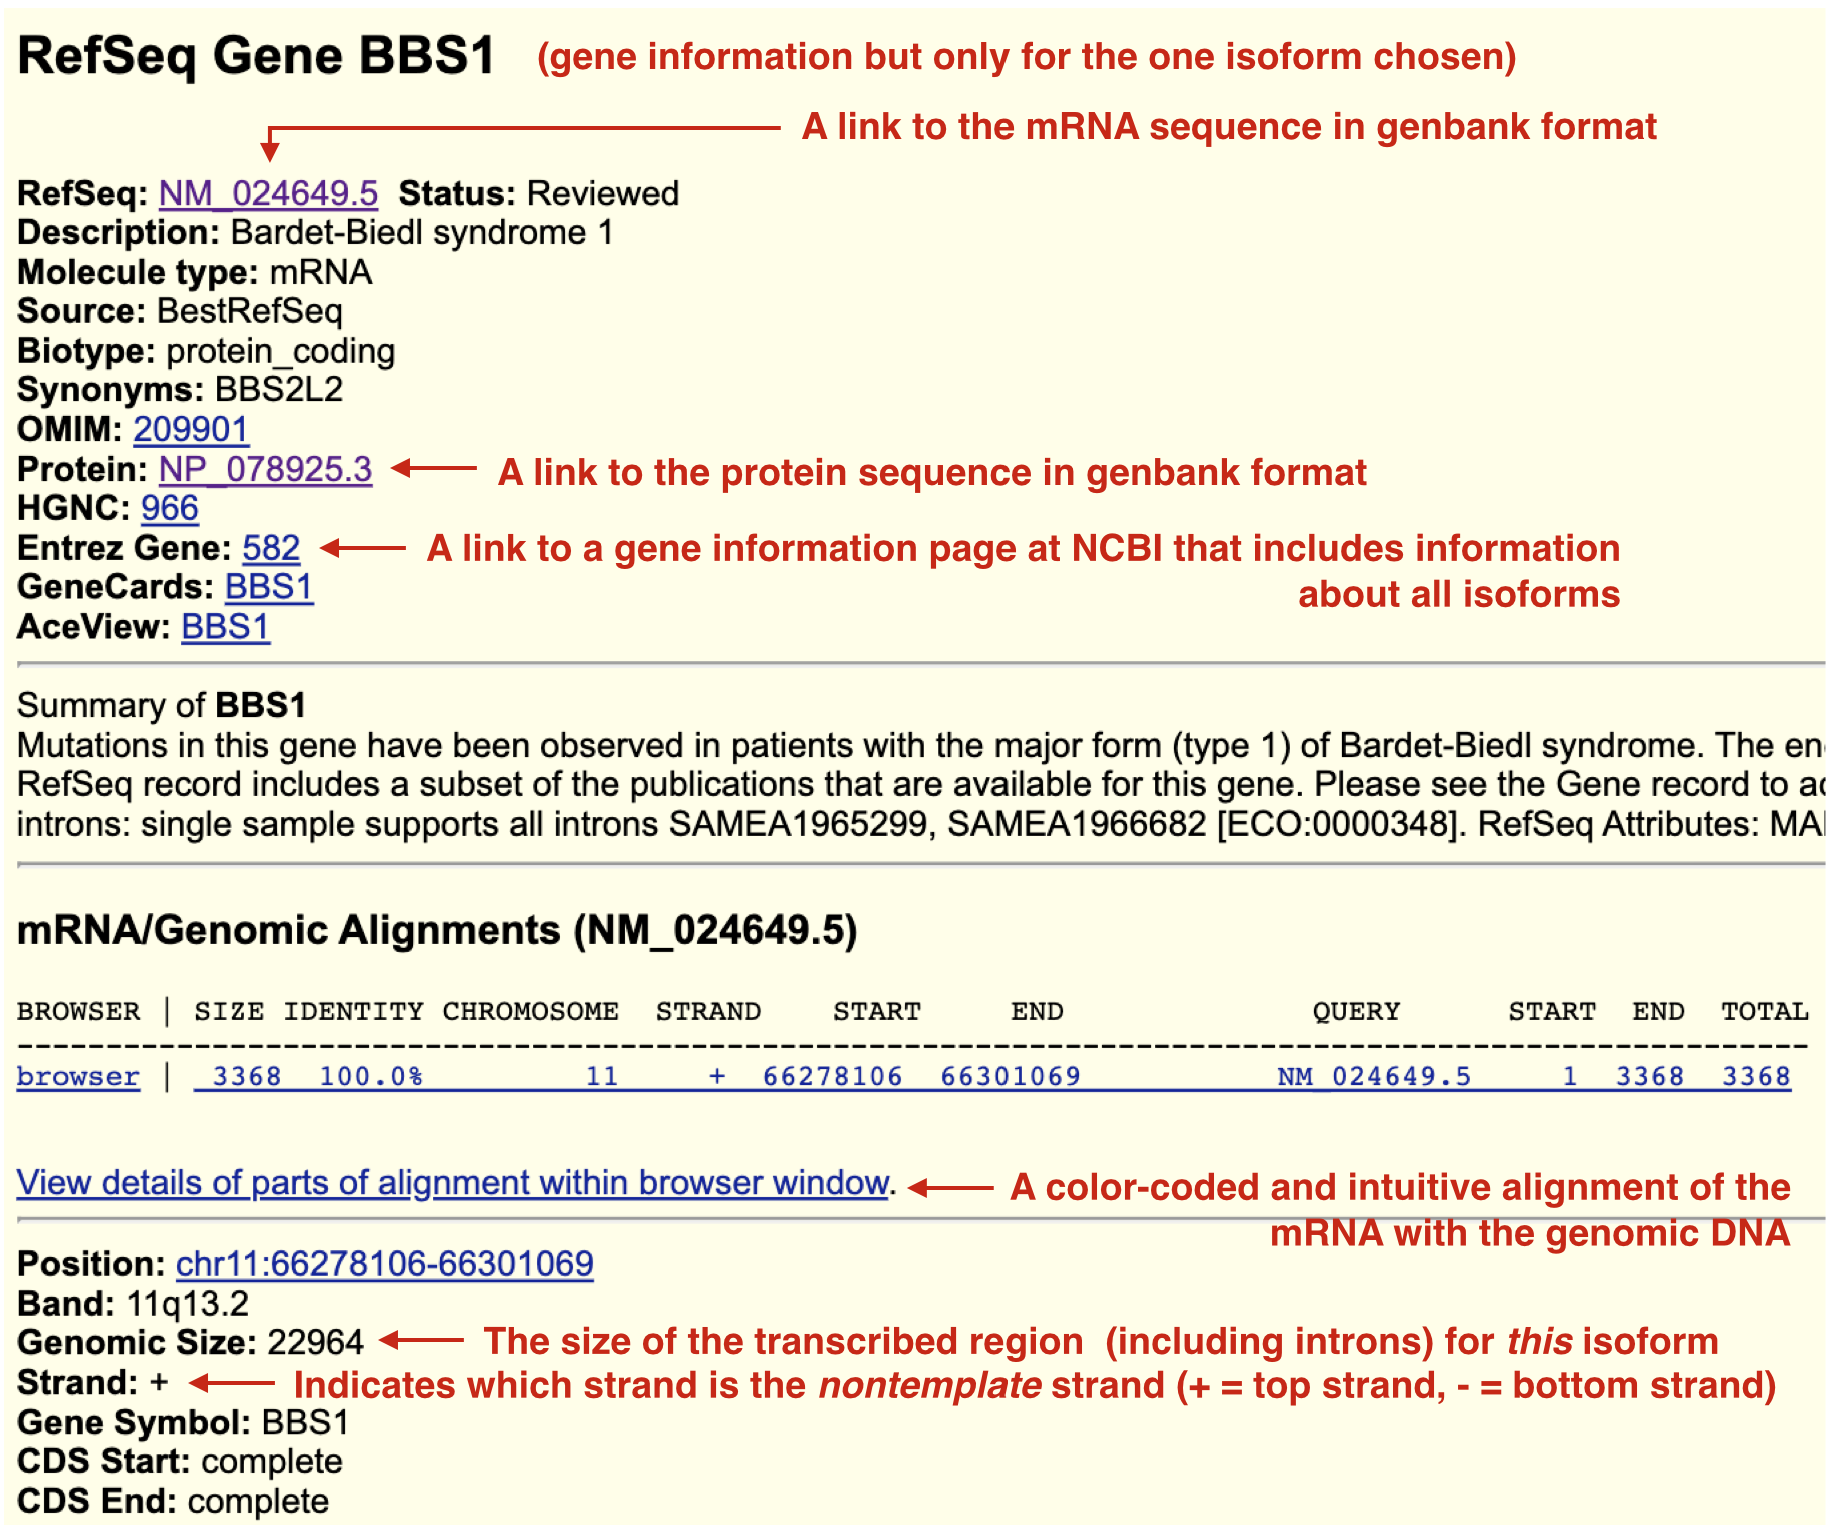 When you click on a gene/transcript schematic in the gene prediction track you are taken to its gene information page. BBS1 only has one isoform and so there is only one gene information page. In other words, this information is transcript specific and depends on which isoform you click on. Useful links are highlighted. Some links will help you answer Test Your Understanding questions. Explore!